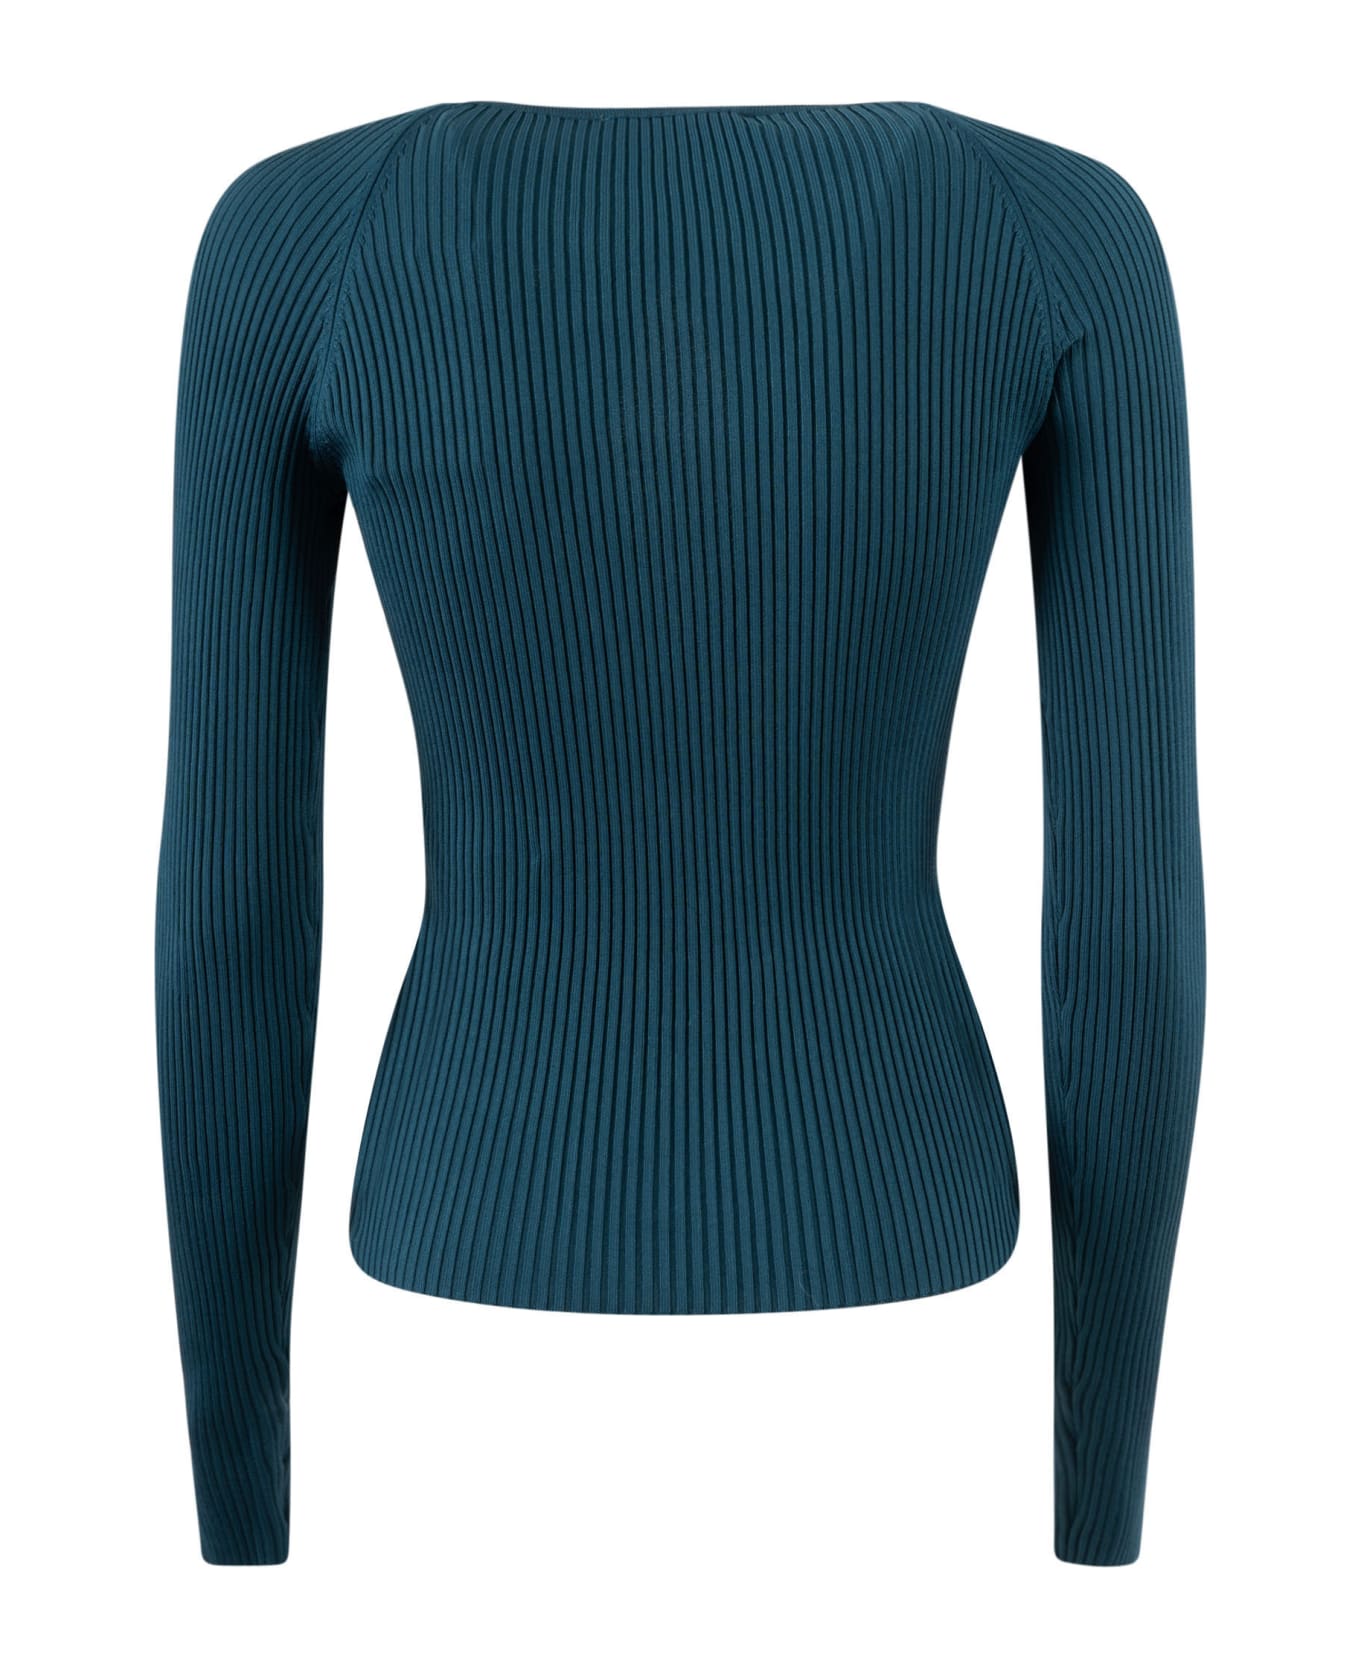 Coperni Twisted Cut-out Knit Top - Peacock